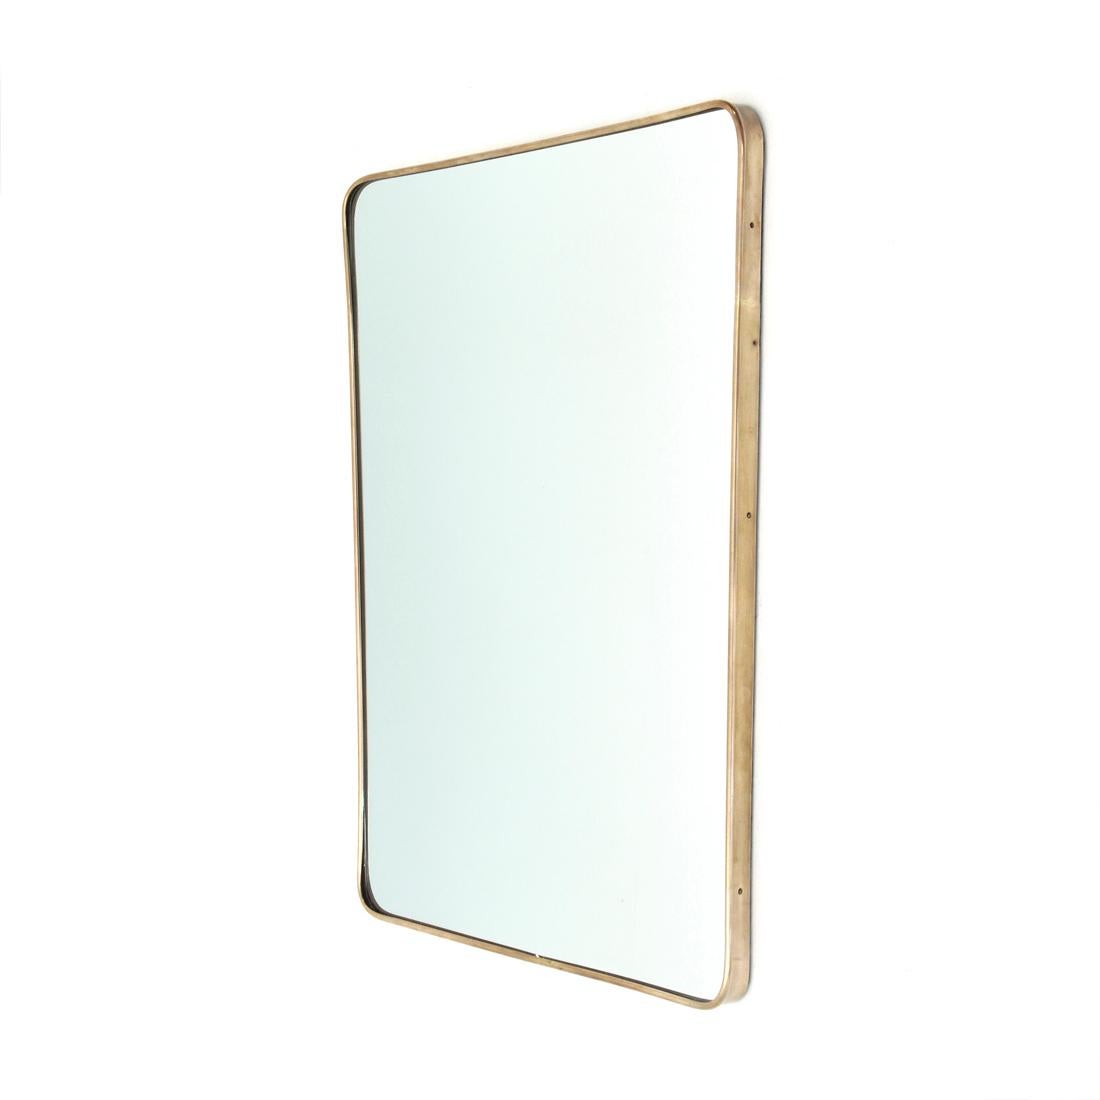 Italian manufacture mirror produced in the 1950s.
Wooden frame, mirrored glass and brass frame.
Good general conditions, some signs due to normal use over time.

Dimensions: Length 55 cm, depth 3 cm, height 72 cm.